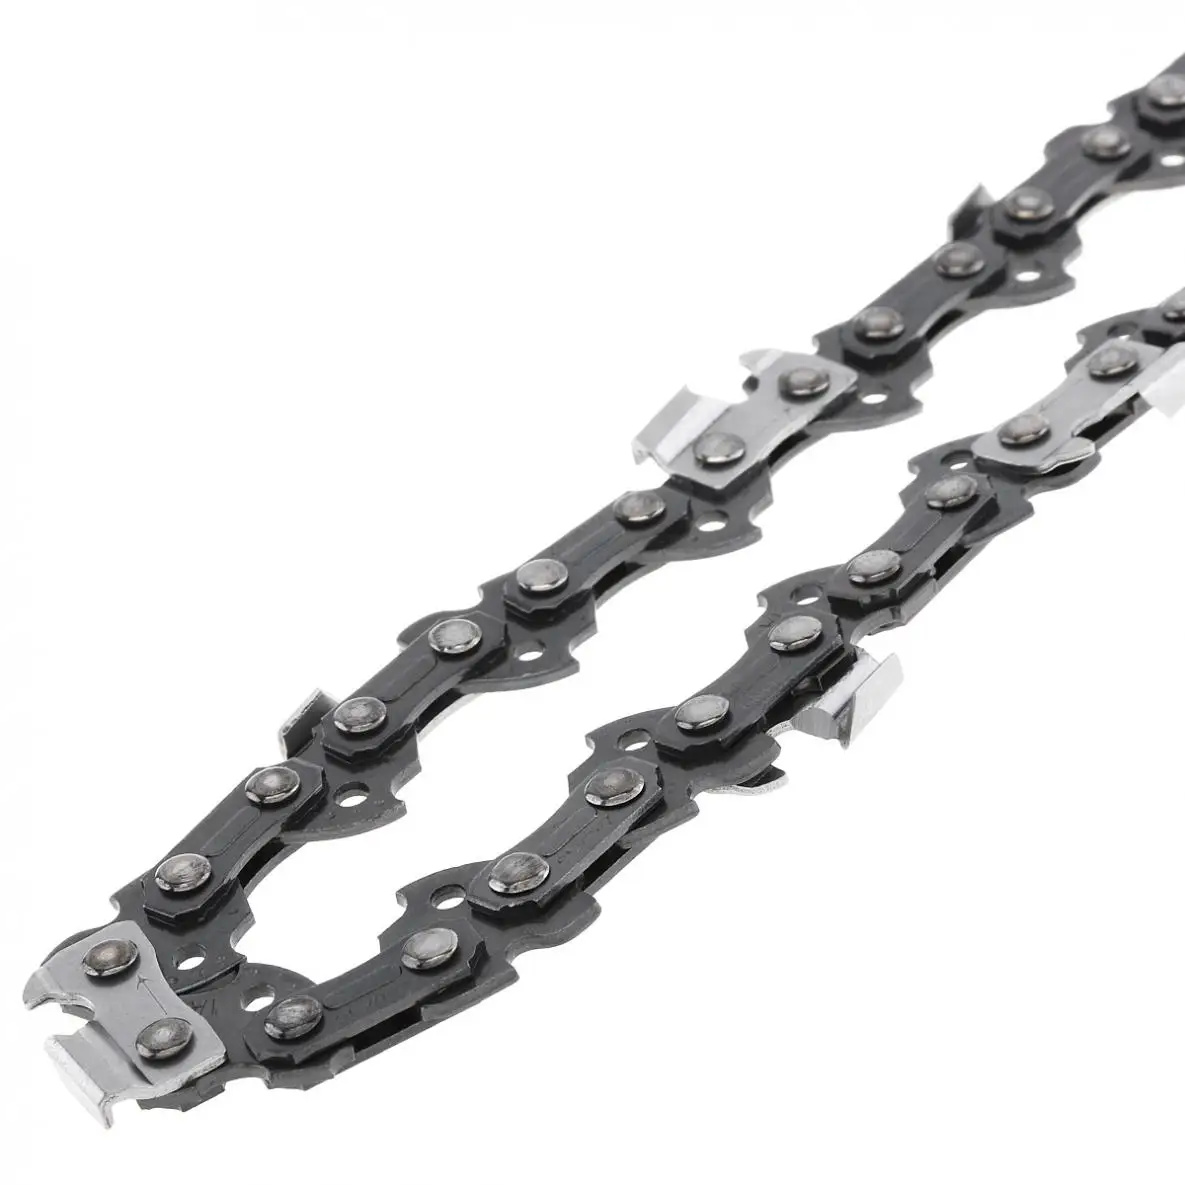 

12 Inch Chainsaw Chain 3/8 Pitch Saw Chain 45 Drive Link Electric Chainsaw Parts Chainsaw Blades For Guide Plate Angle Grinder